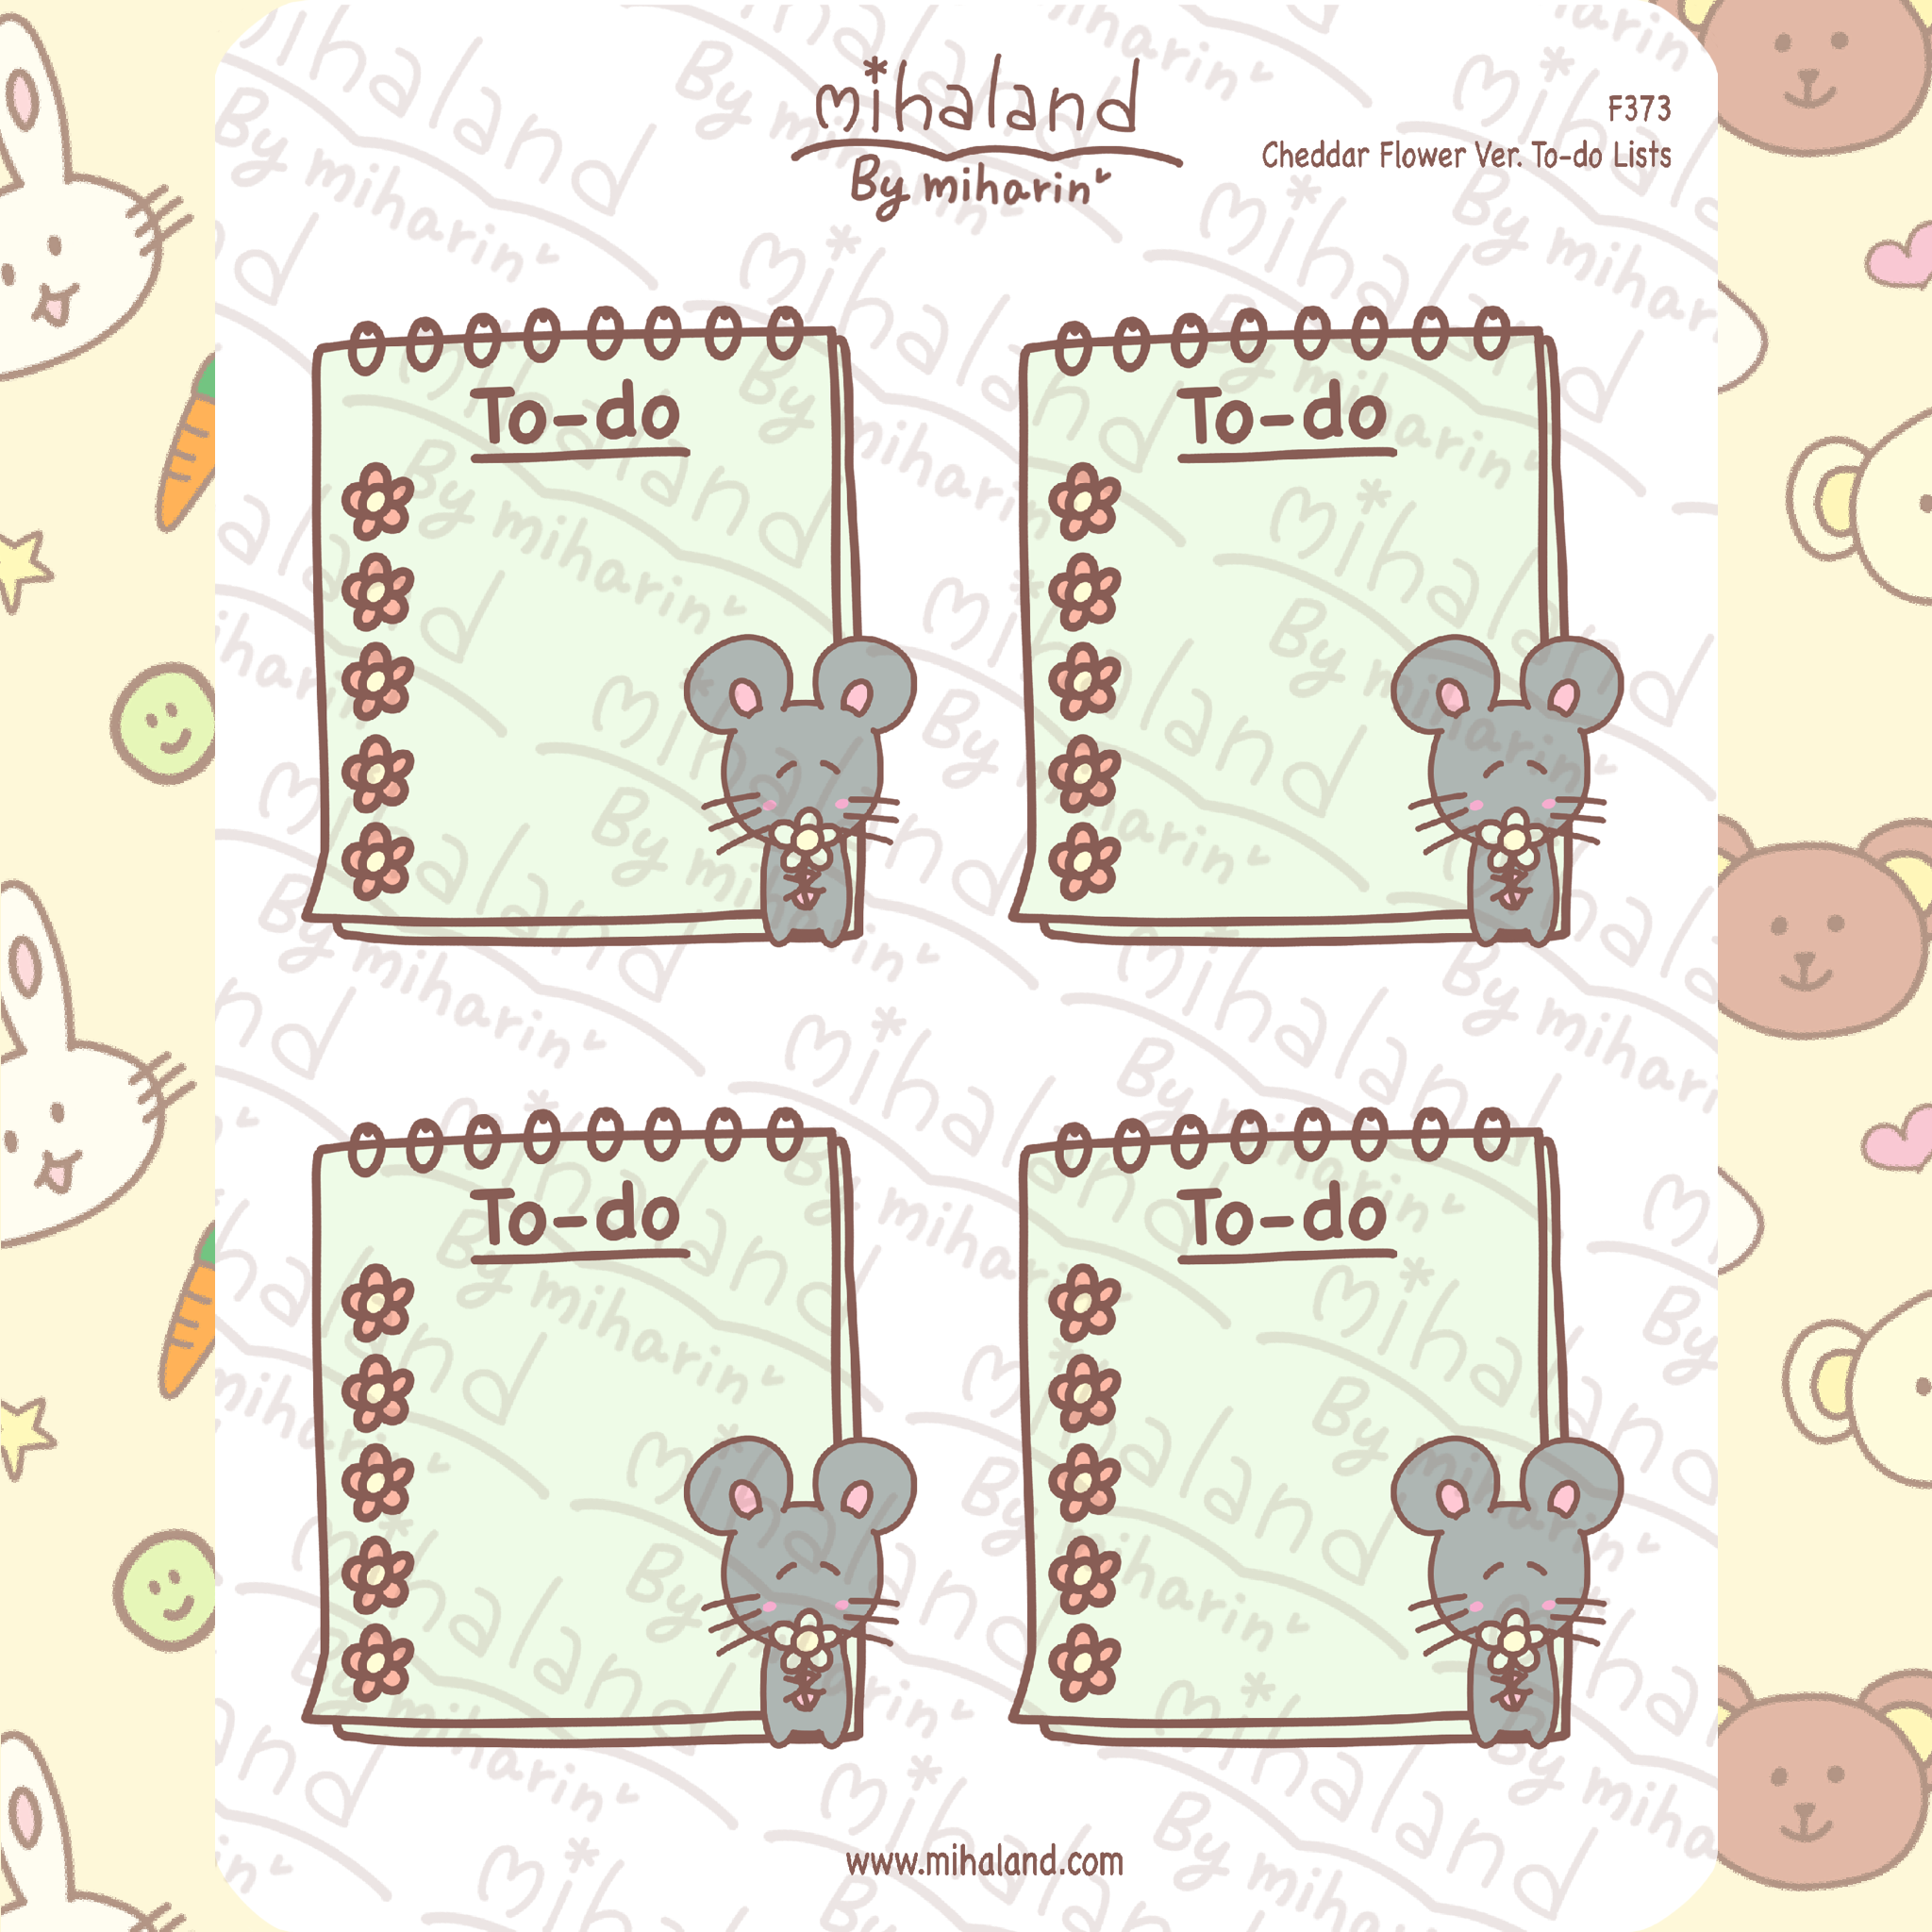 Cheddar Flower Ver. To-do Lists Planner Stickers (F373)